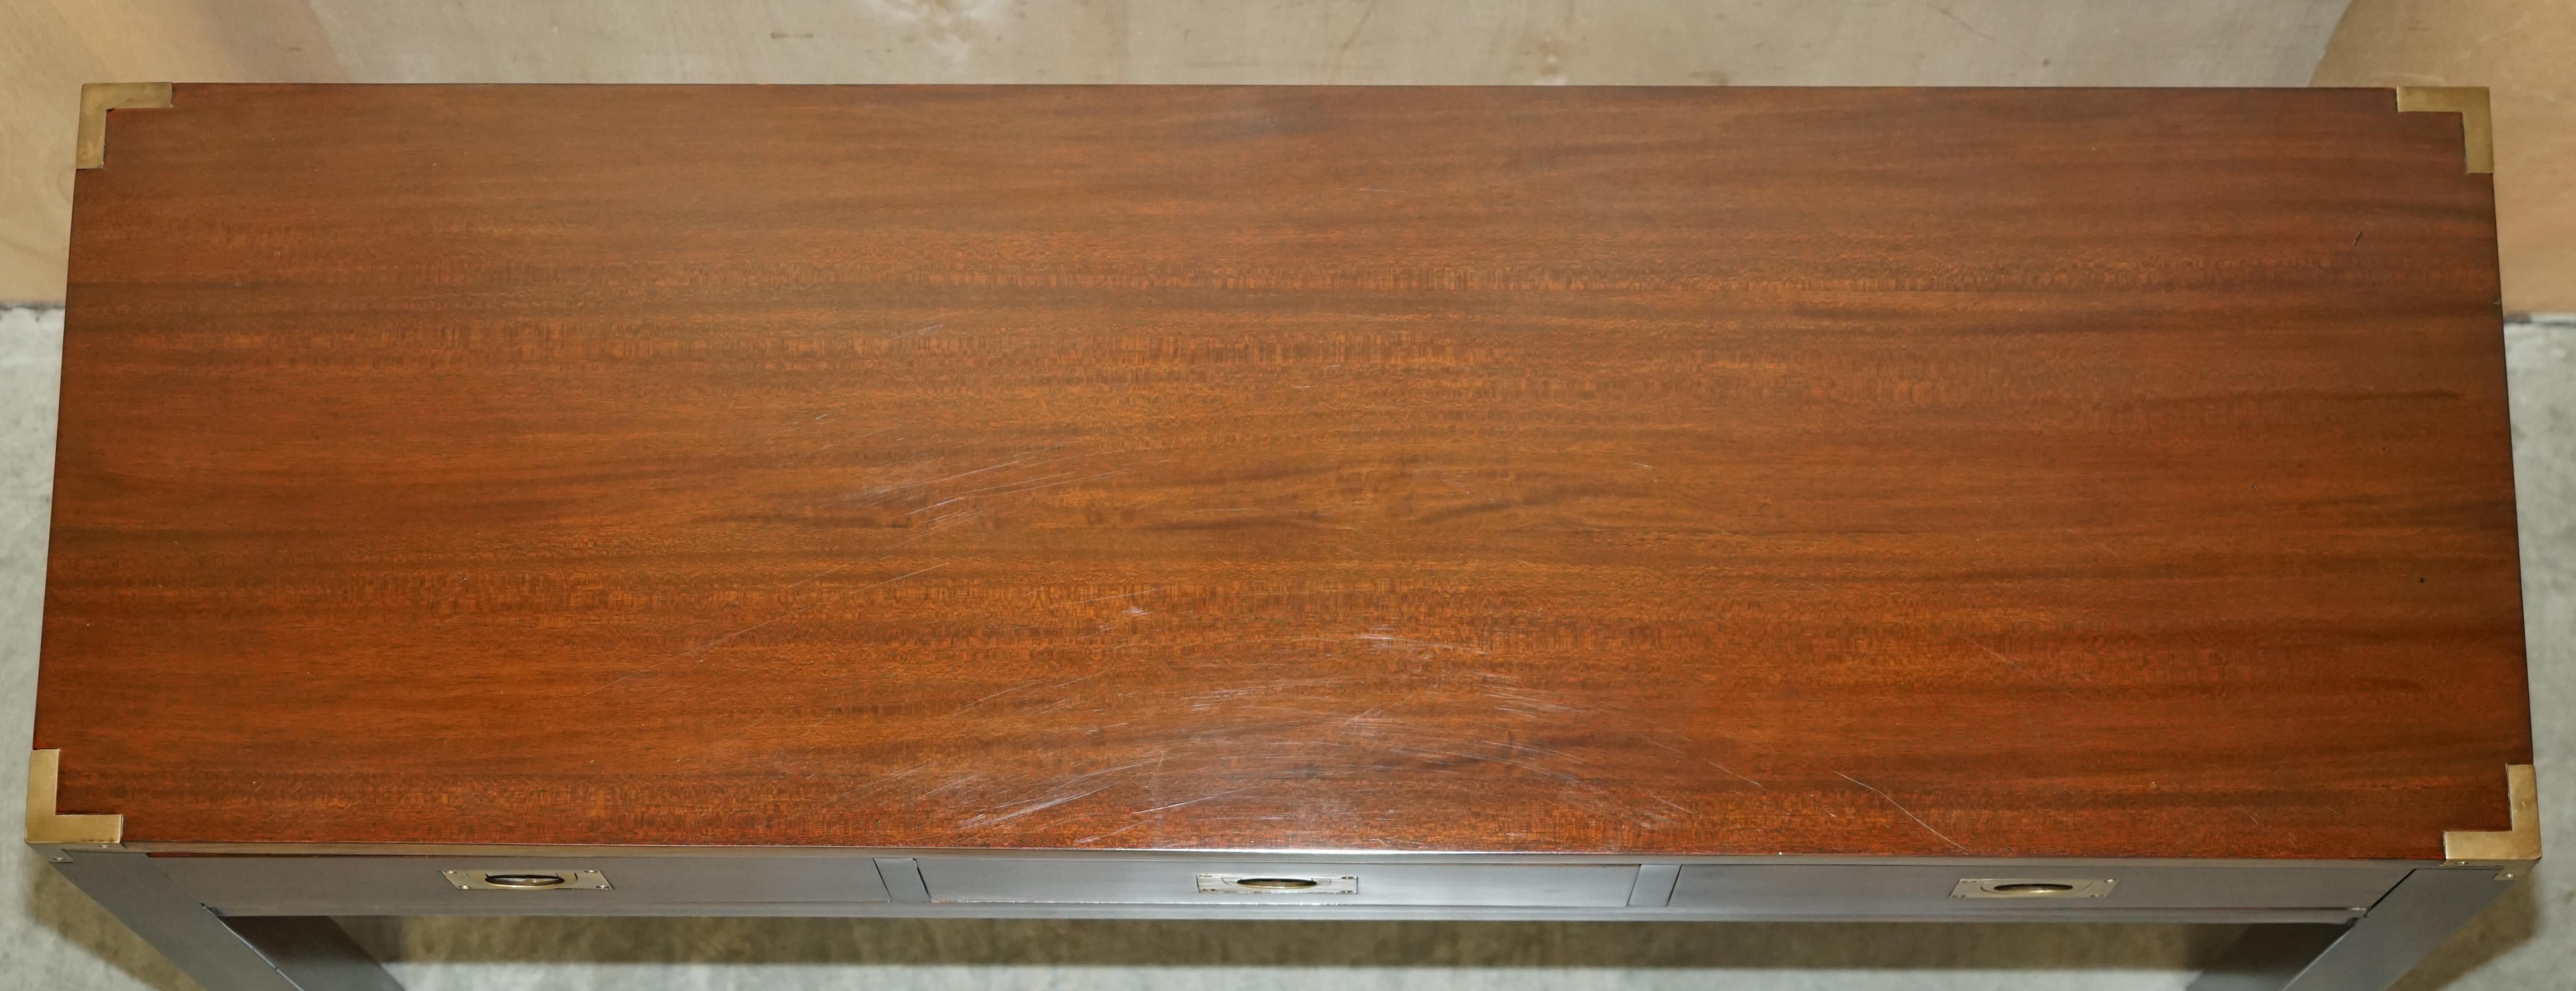 Lovely Vintage Harrods Kennedy Military Campaign Console Table Sideboard Drawers For Sale 3